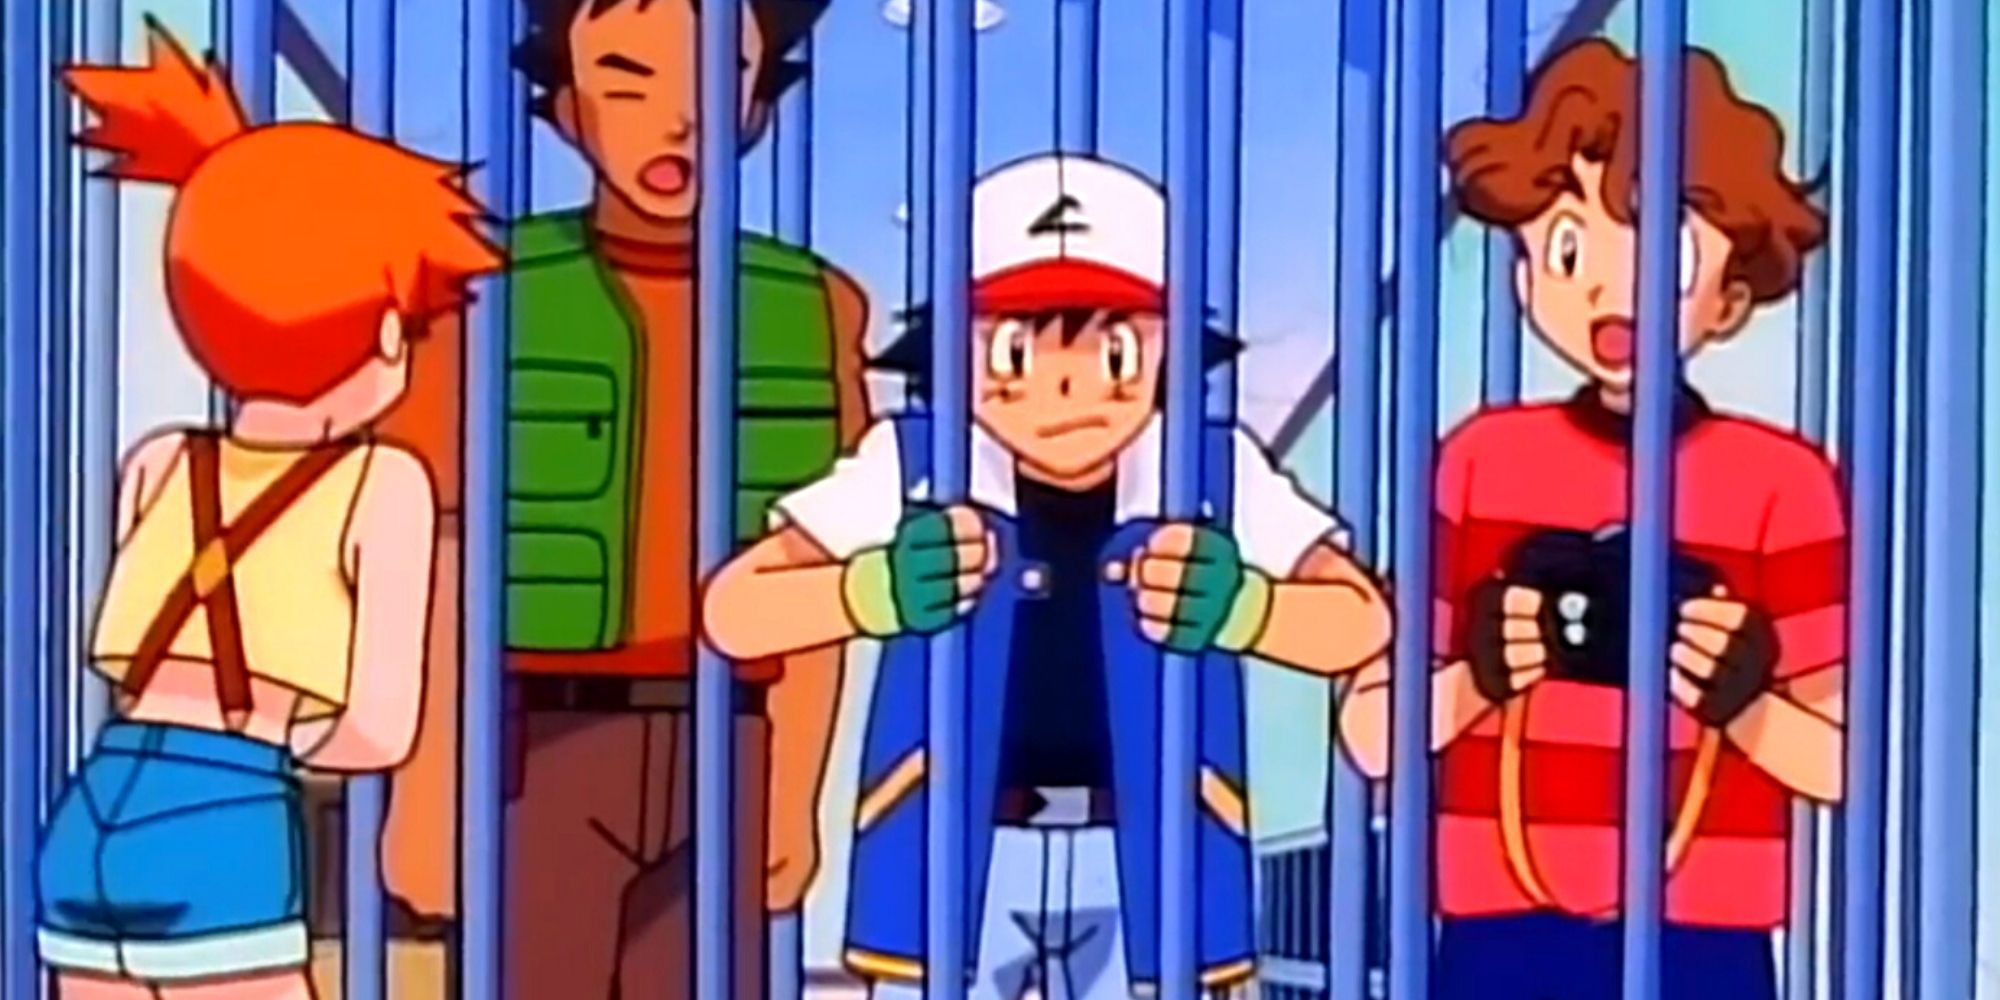 Pokemon: Misty Escaped While Ash, Brock and Todd Are Held Inside Team Rocket's Jail Cell